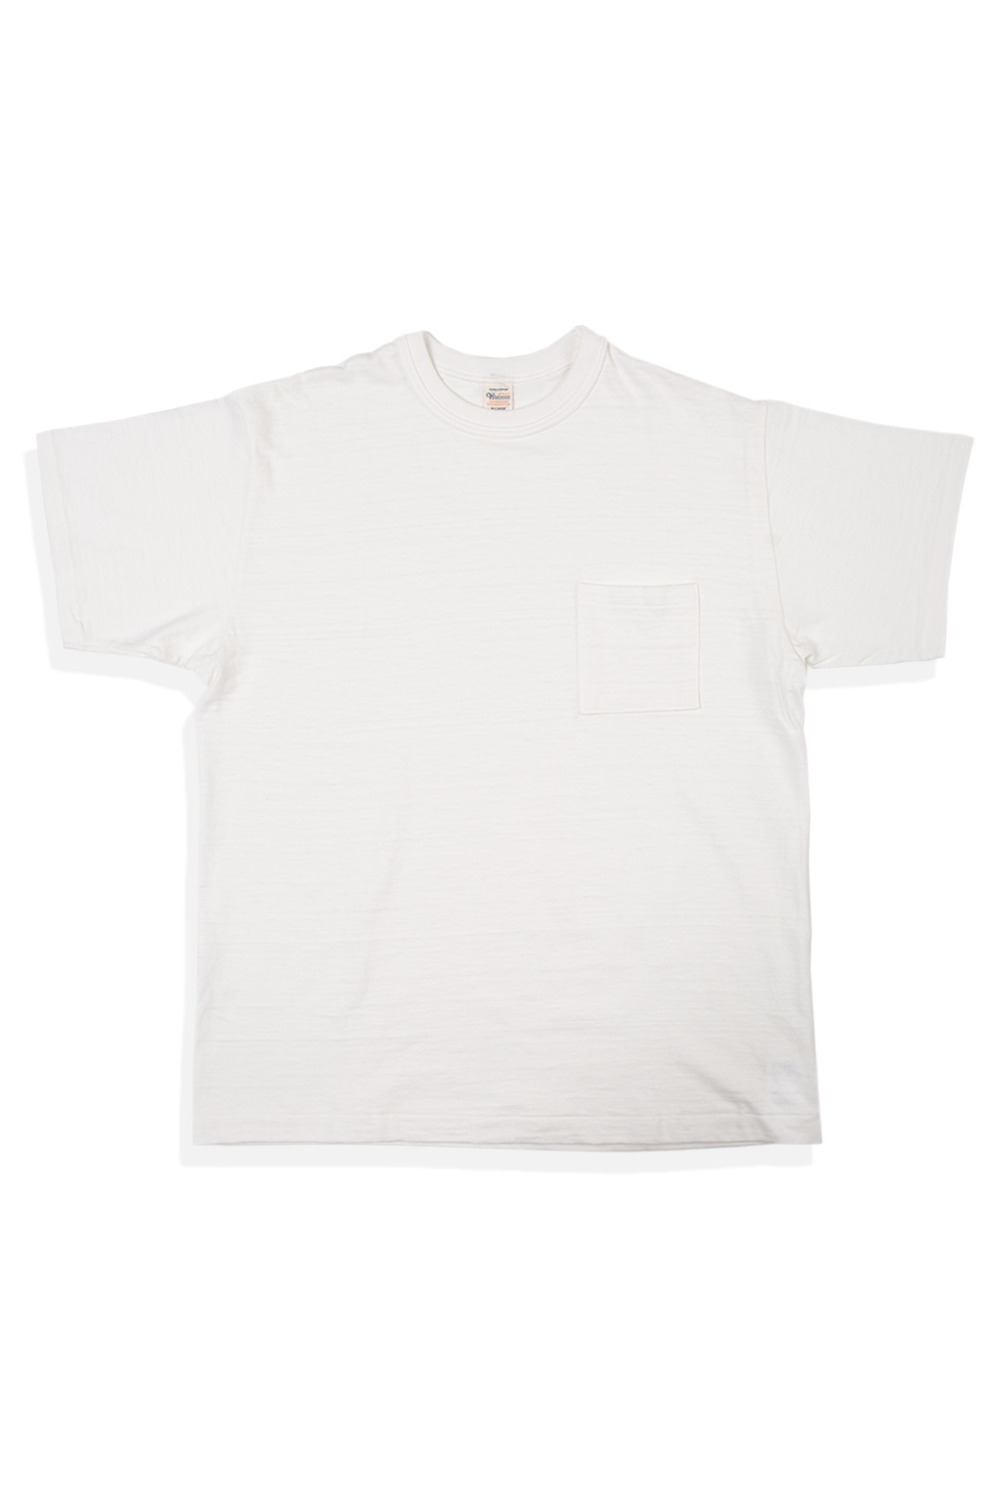 LOT 4601 POCKET T OFFWHITE